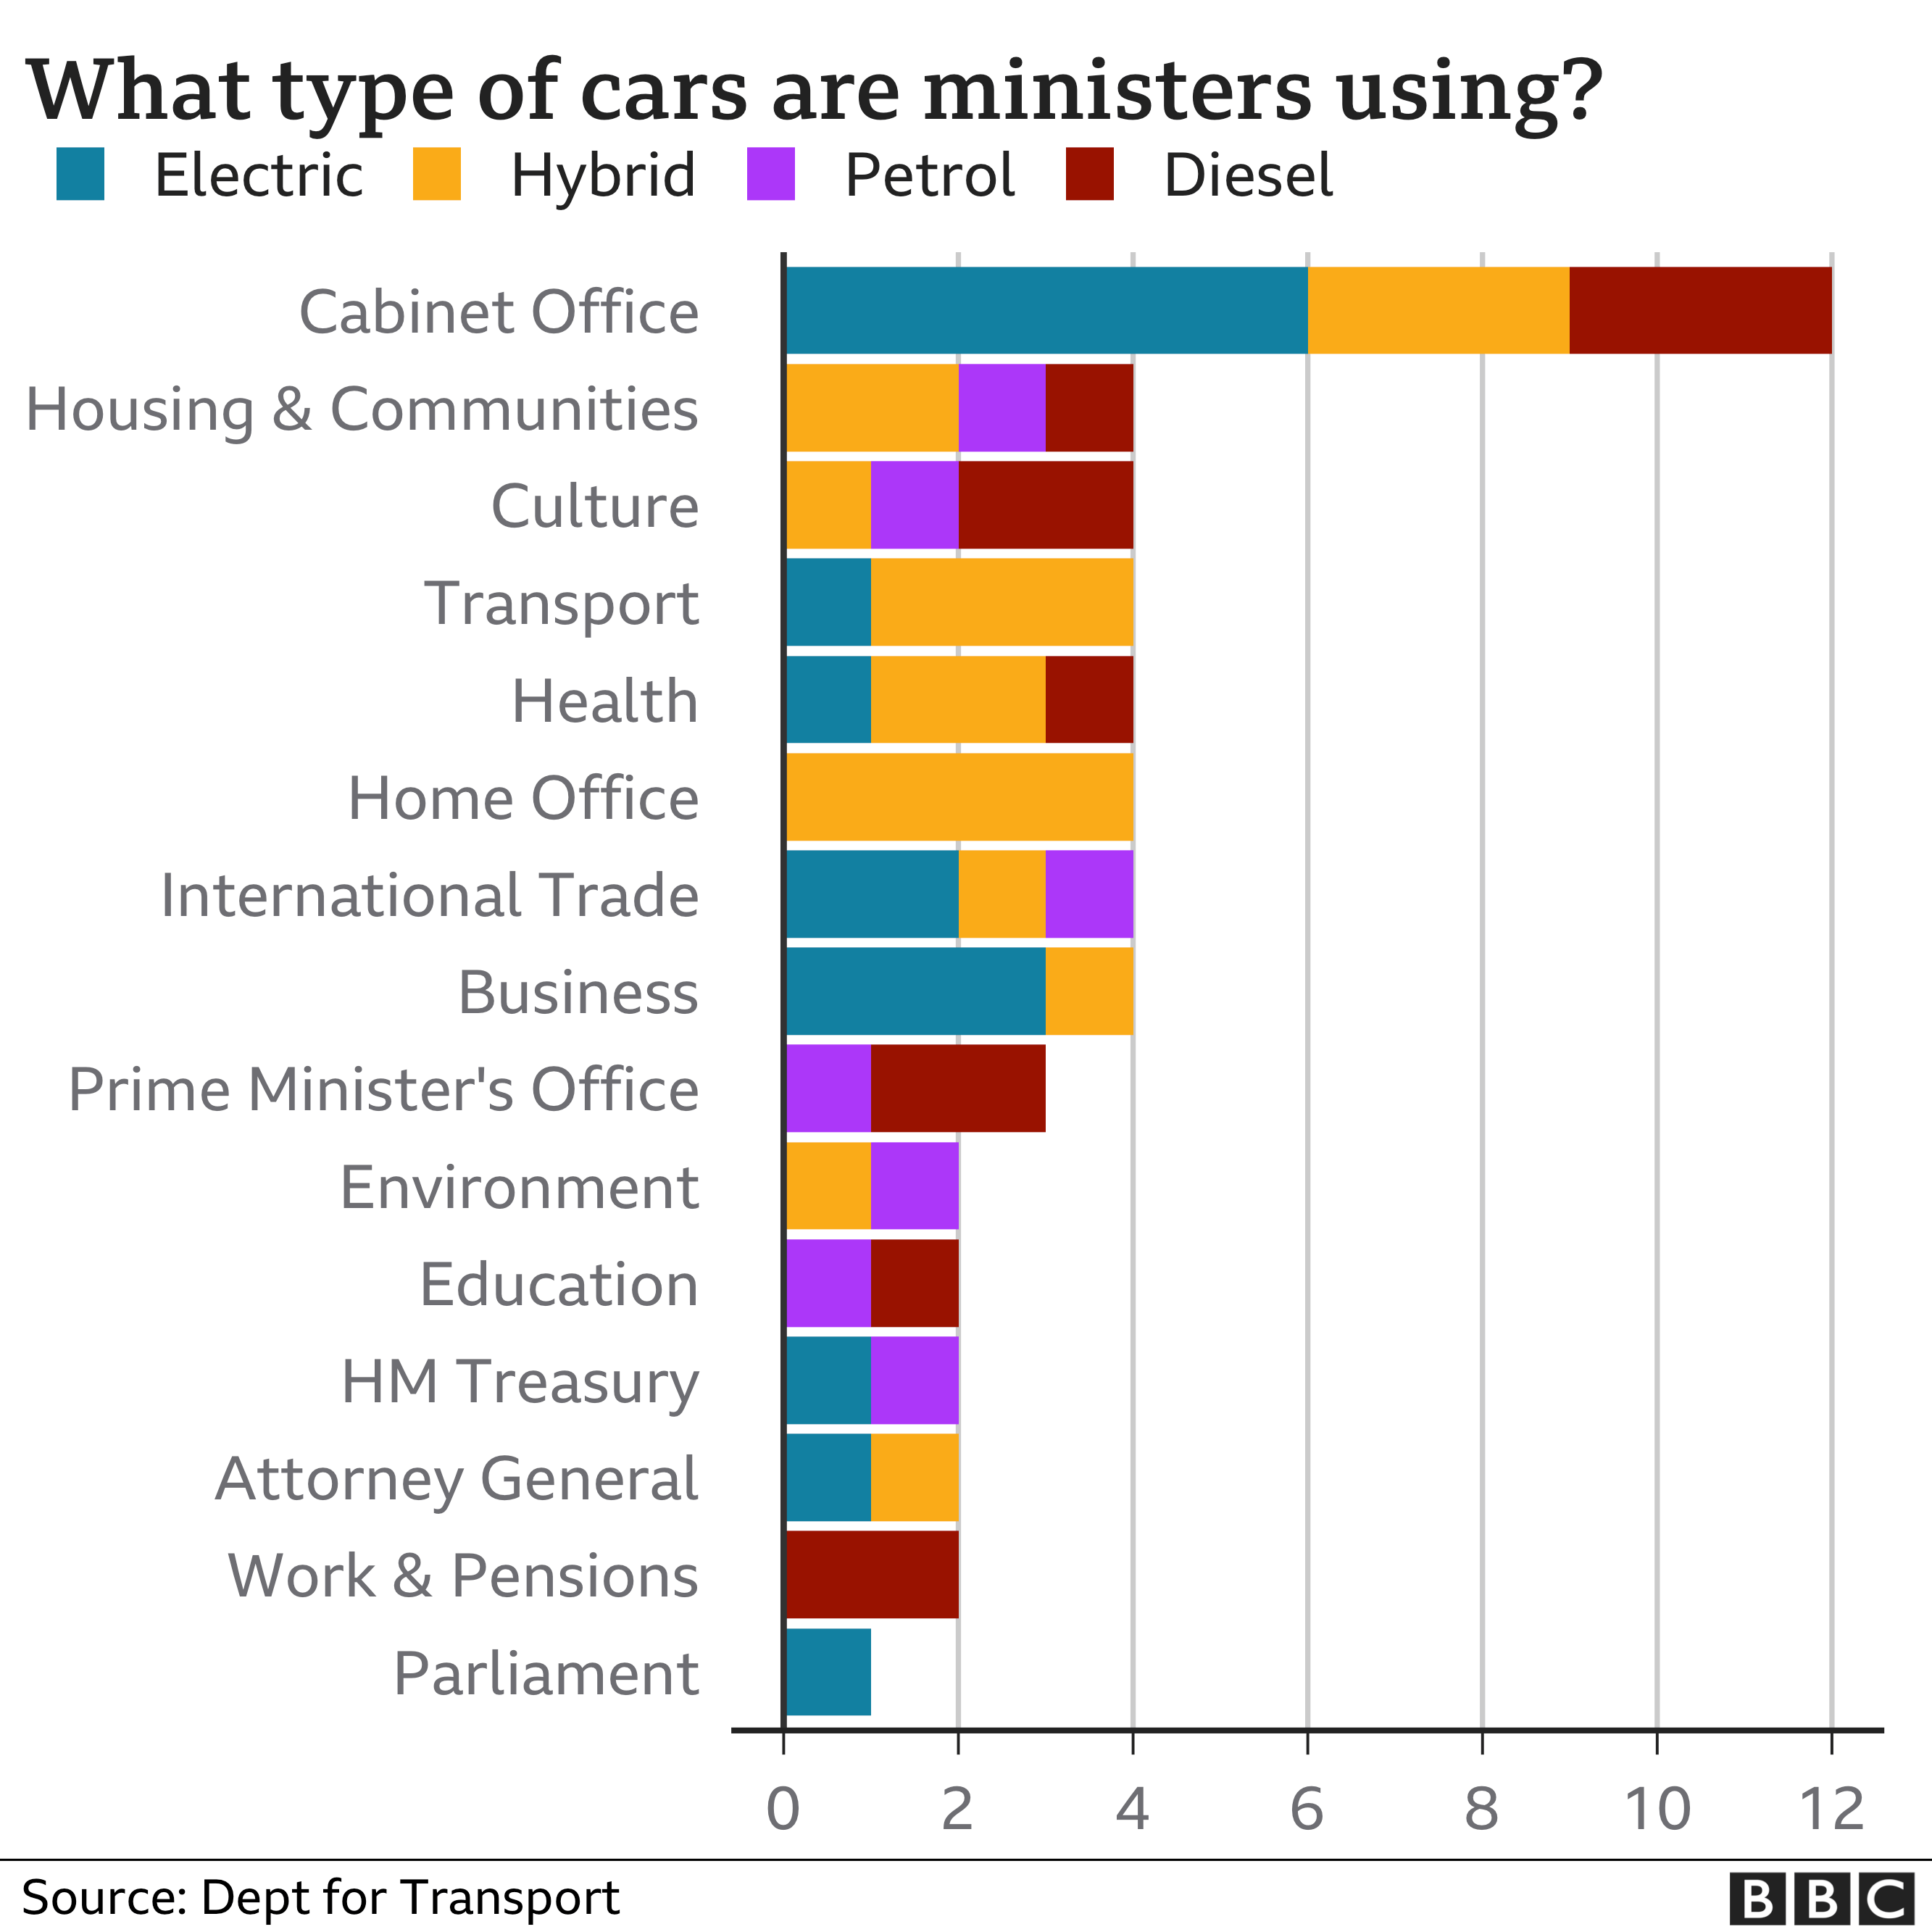 Ministerial cars